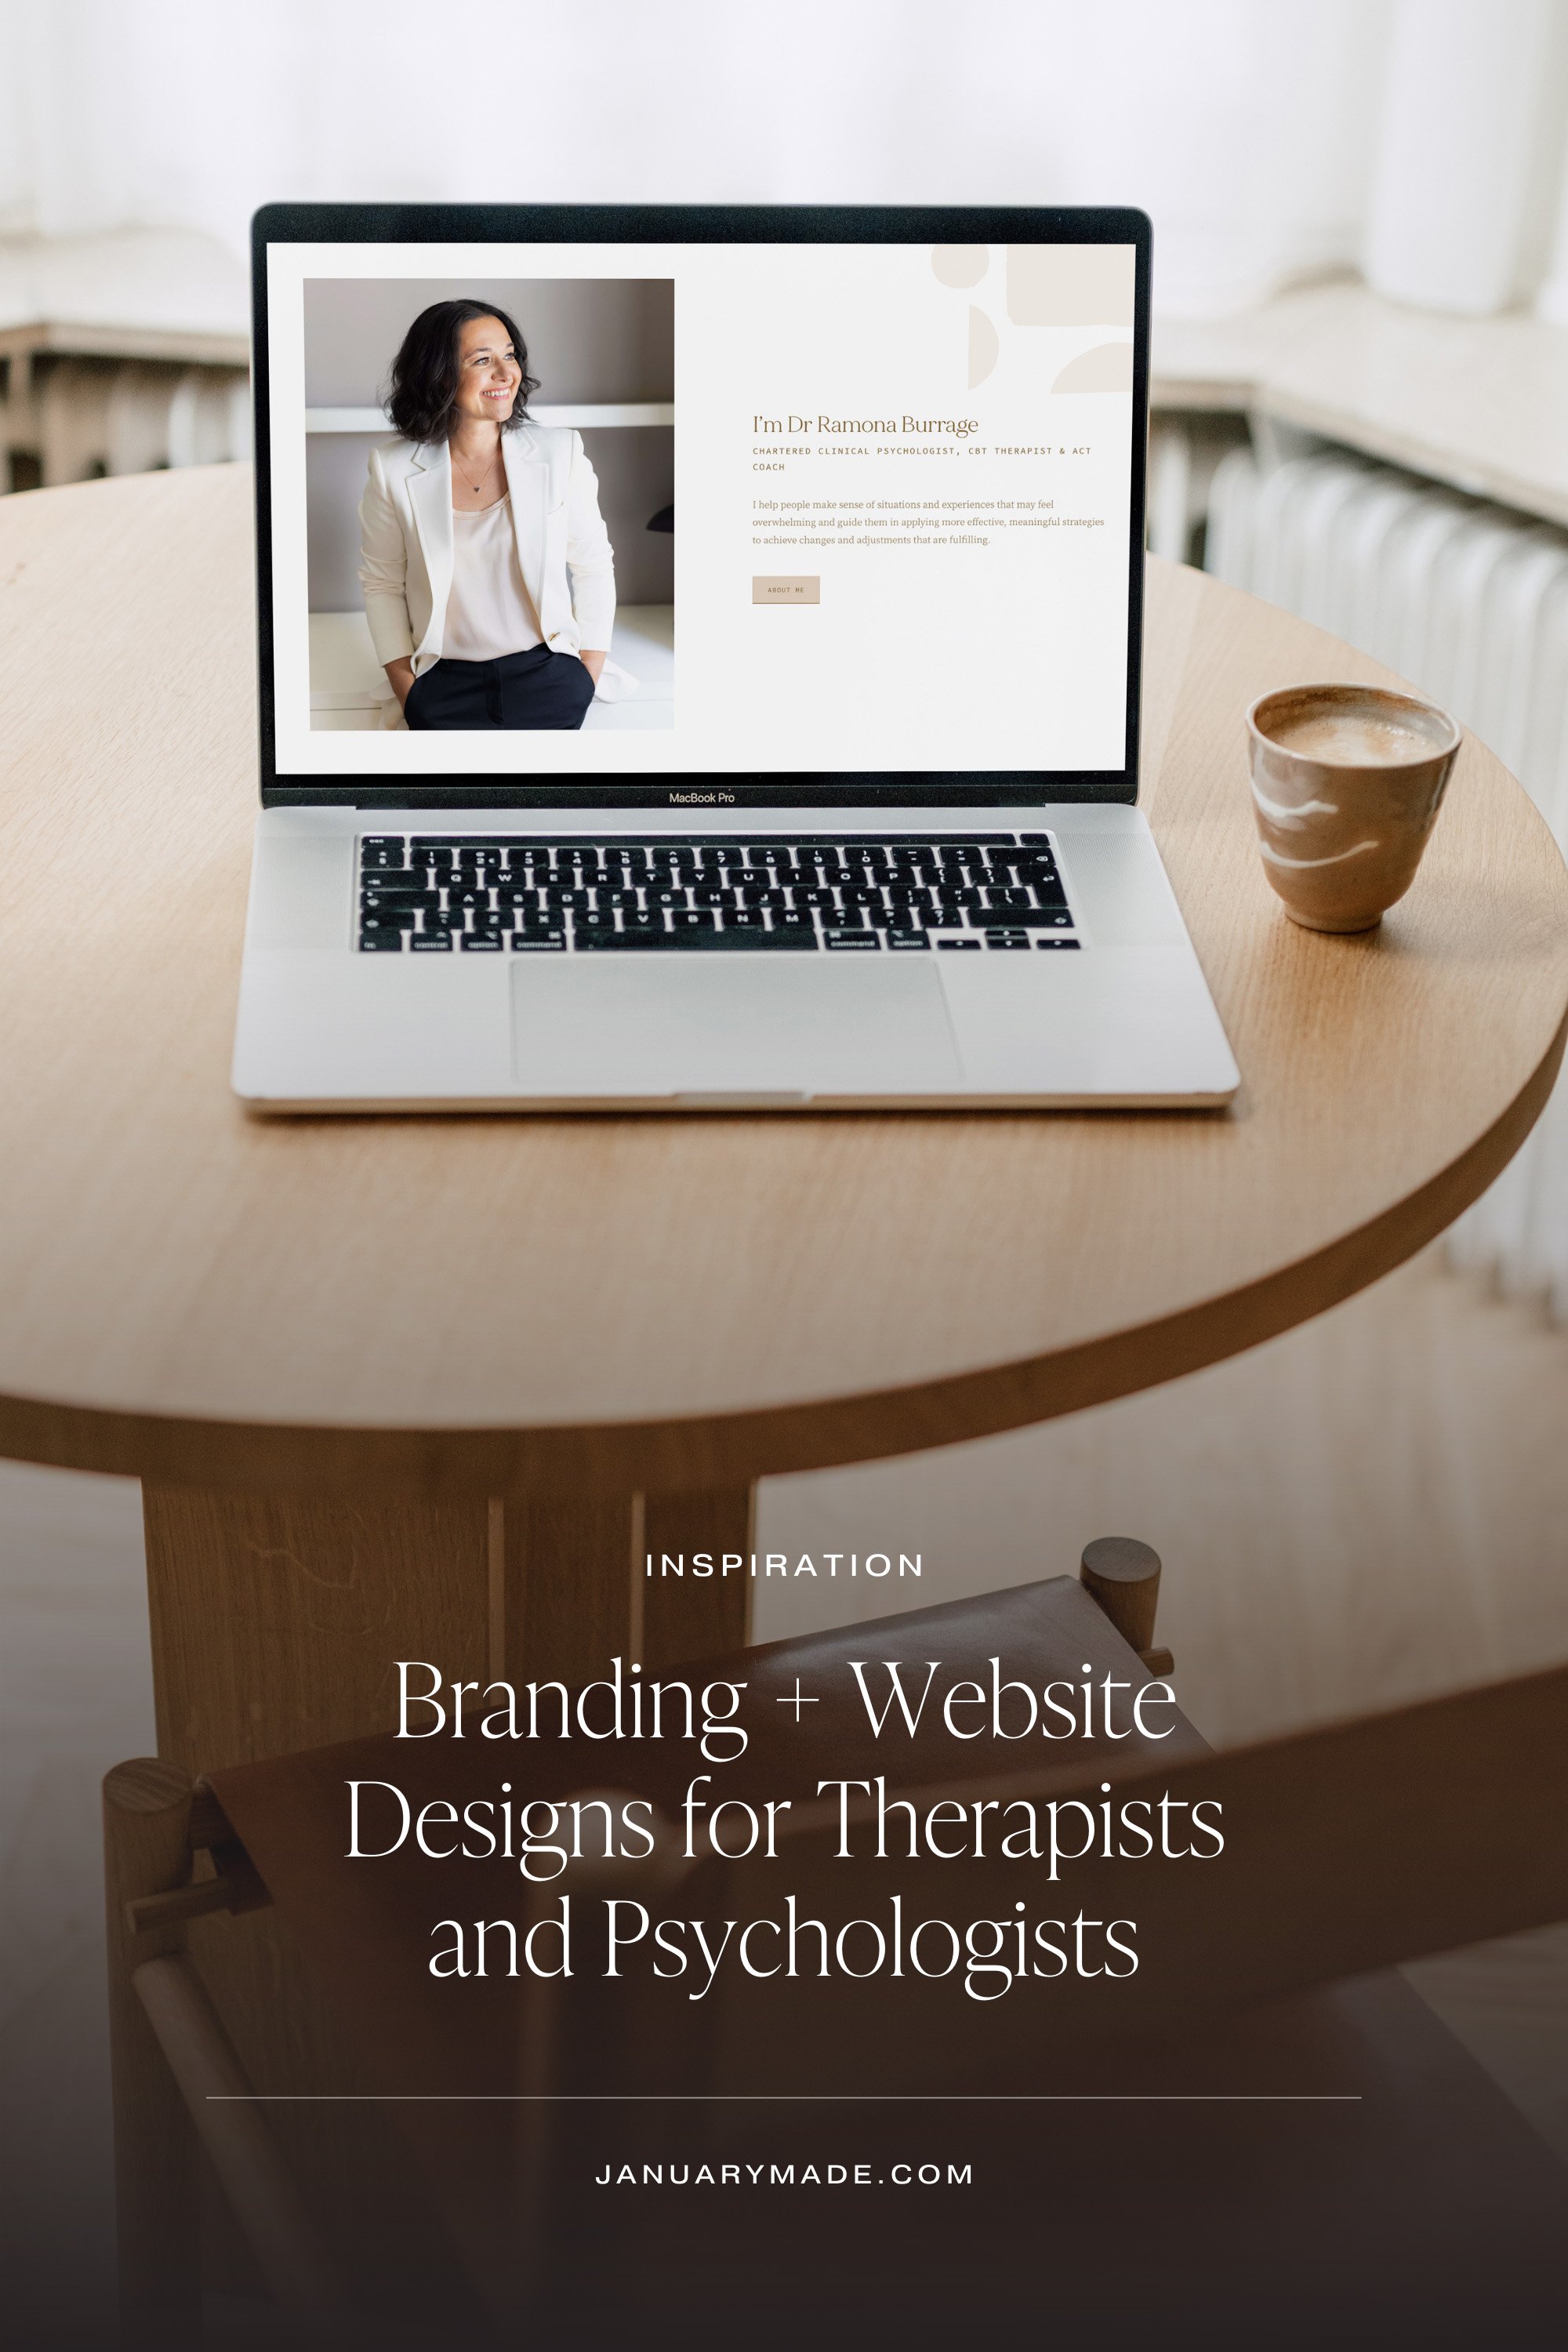 Empowering Connections: Transformative Branding + Website Designs for Therapists and Psychologists